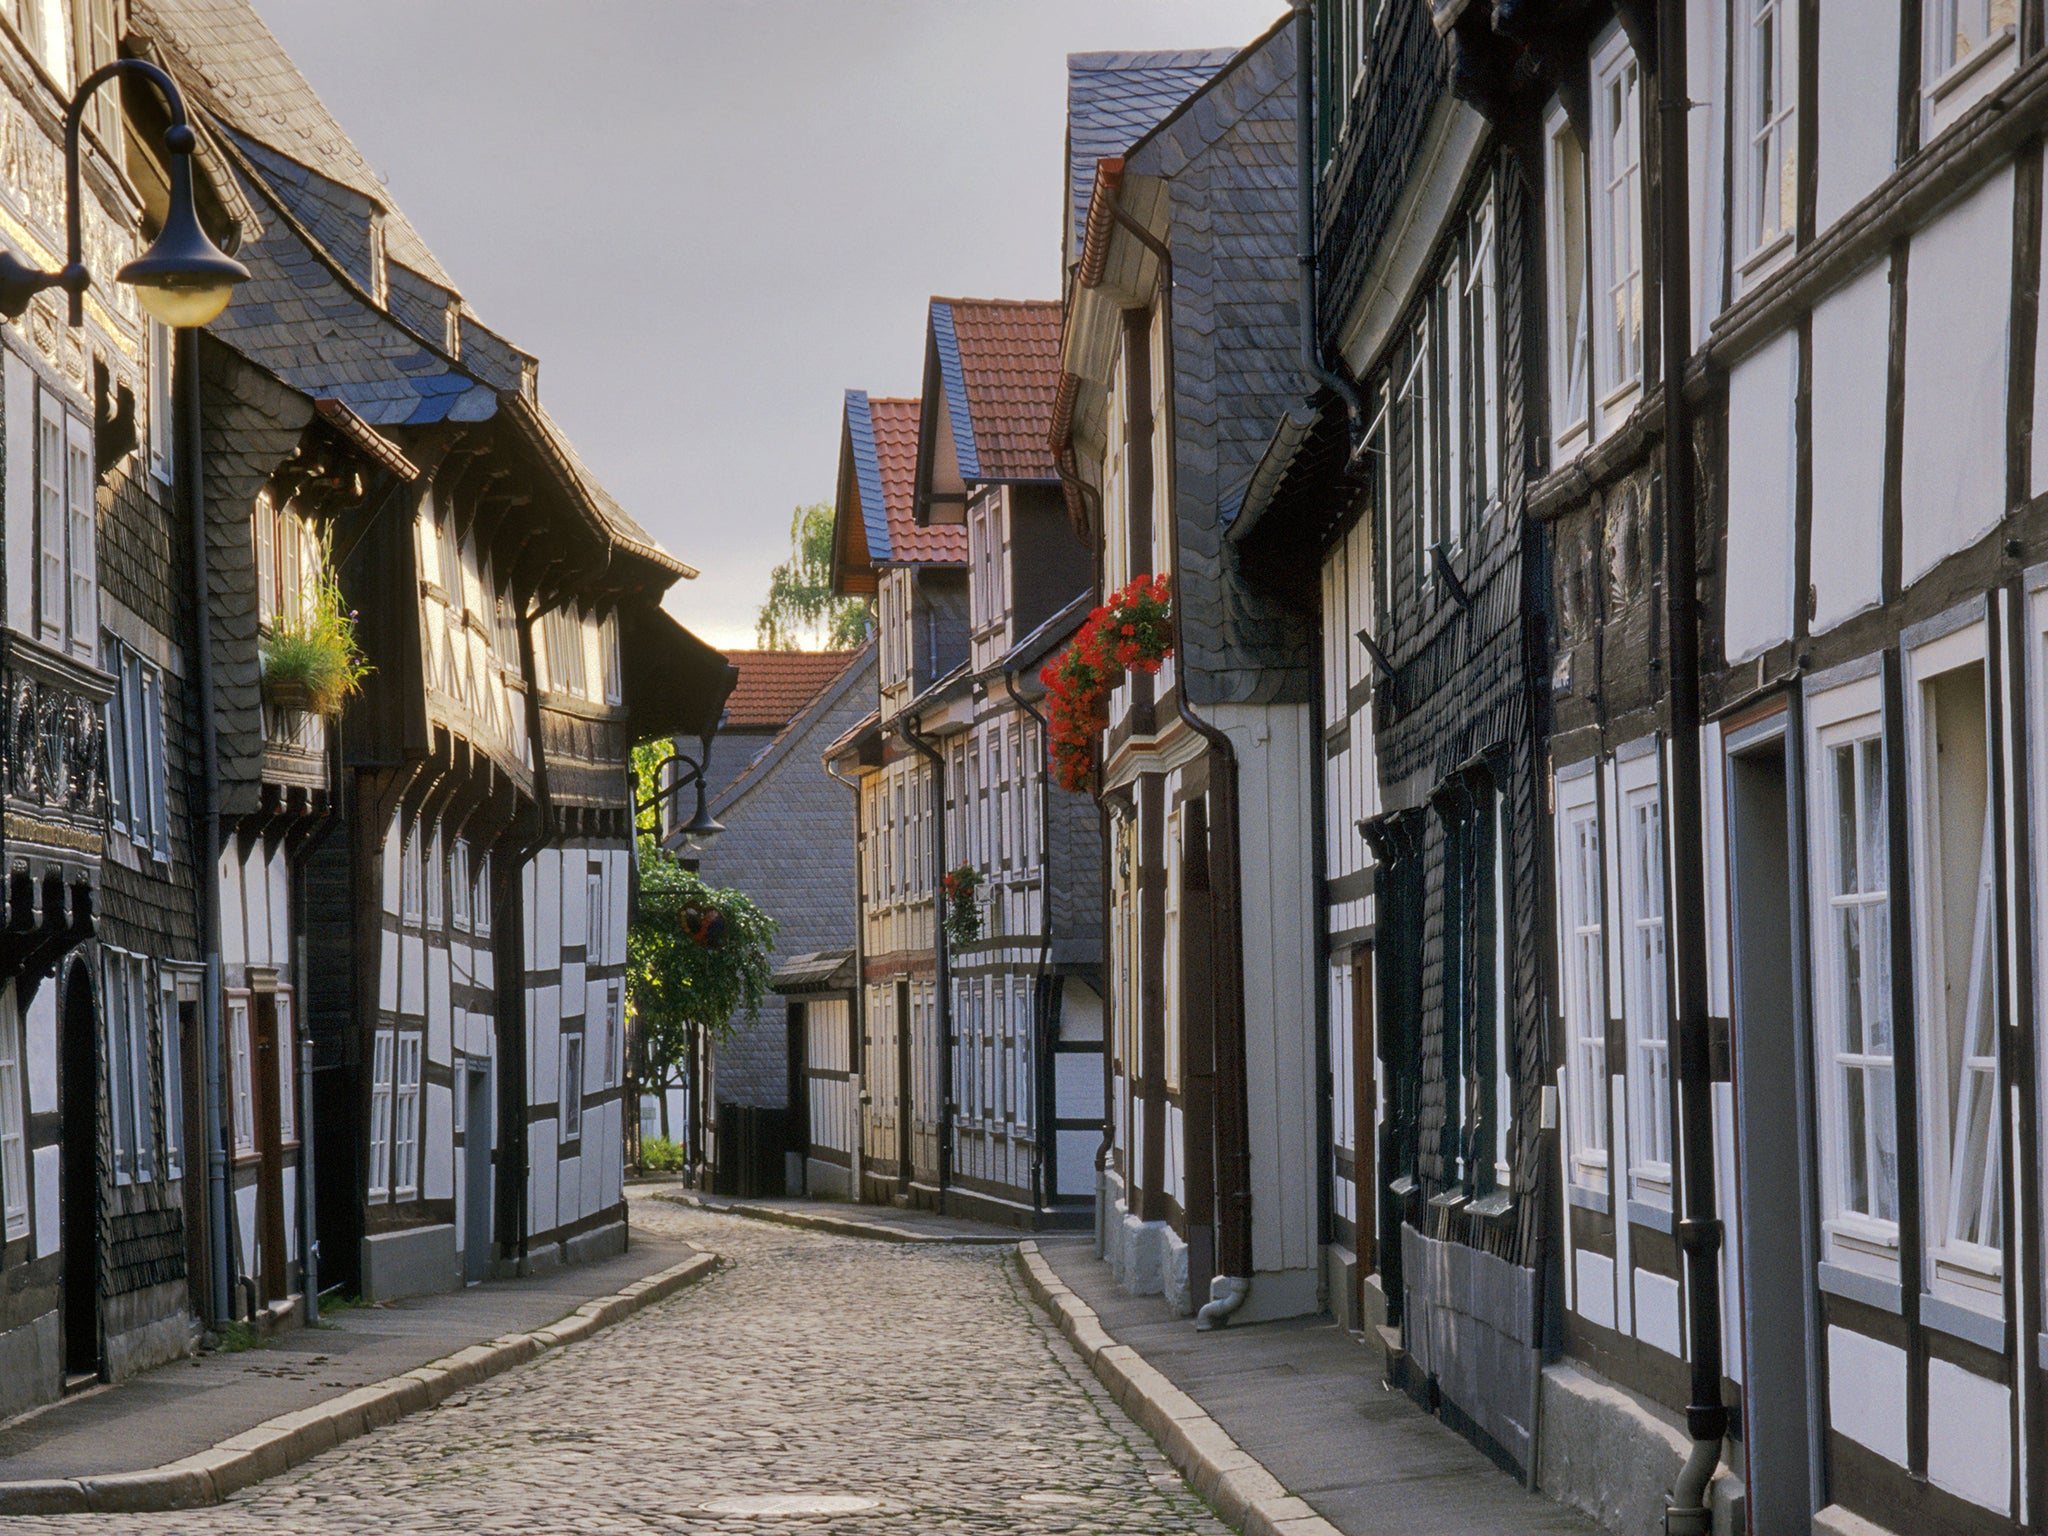 Goslar is a mostly middle-class town full of timber-framed houses